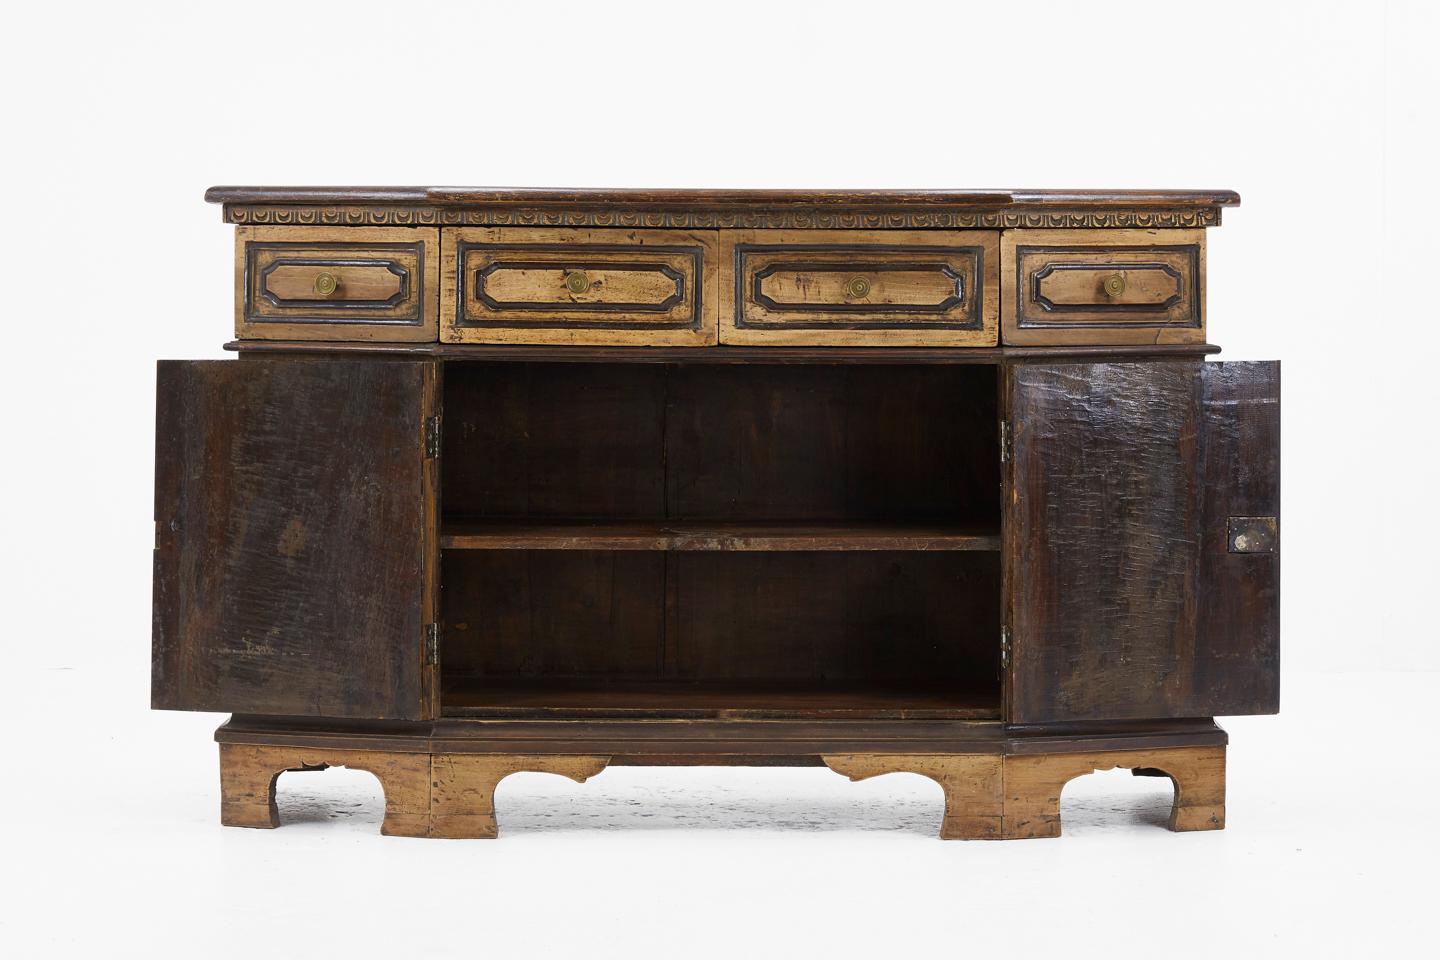 Rustic 18th century Italian walnut sideboard of unusual shape and nice small proportions, with decorative carved panel doors and drawers.